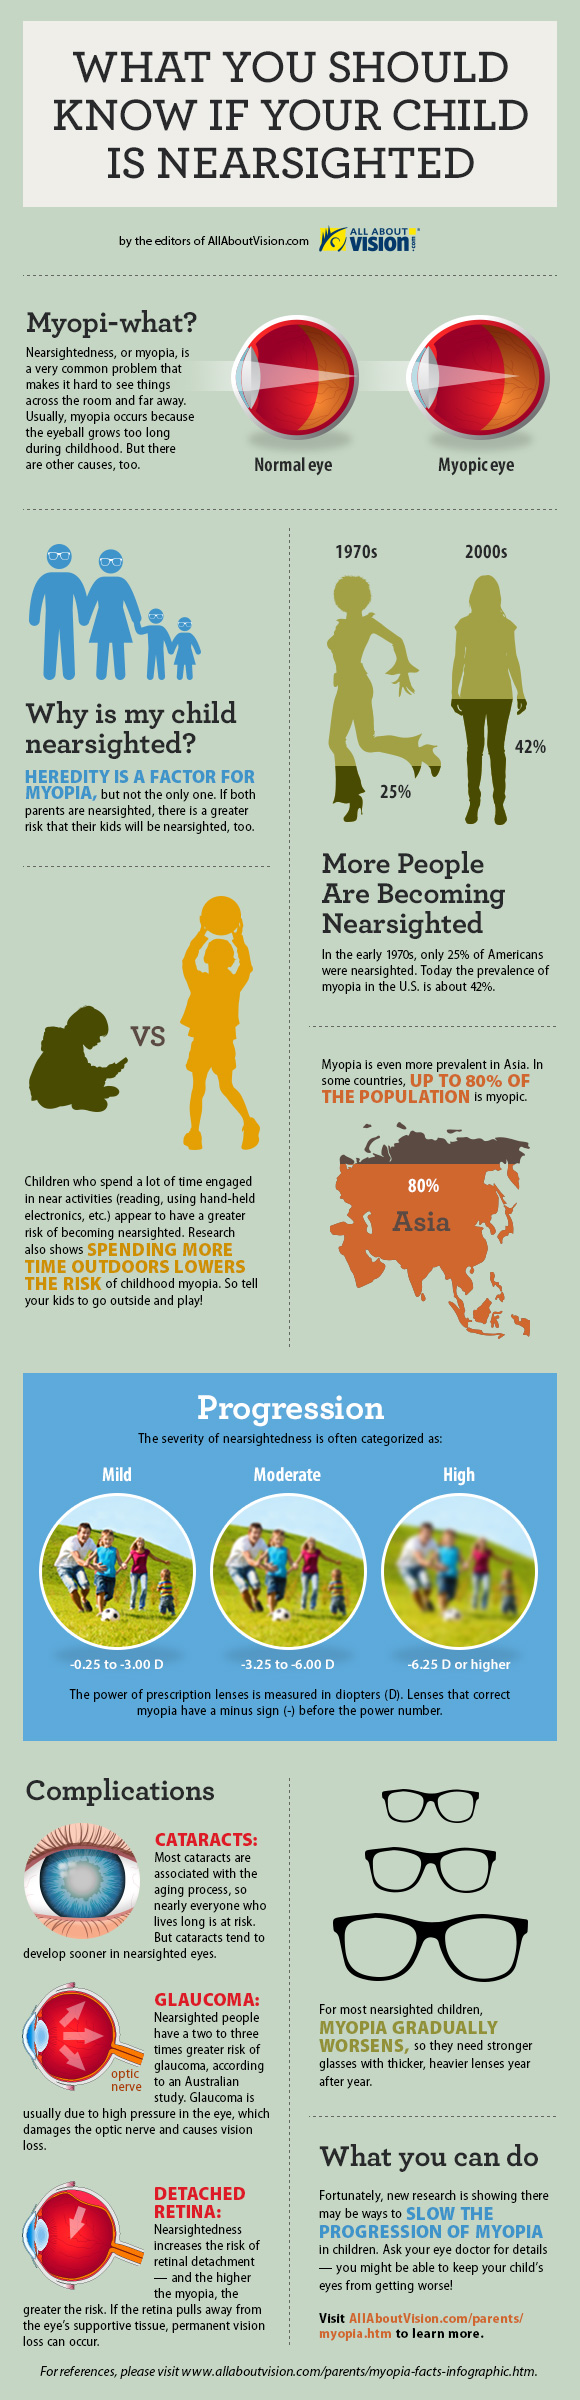 Myopia Nearsighted Child Facts